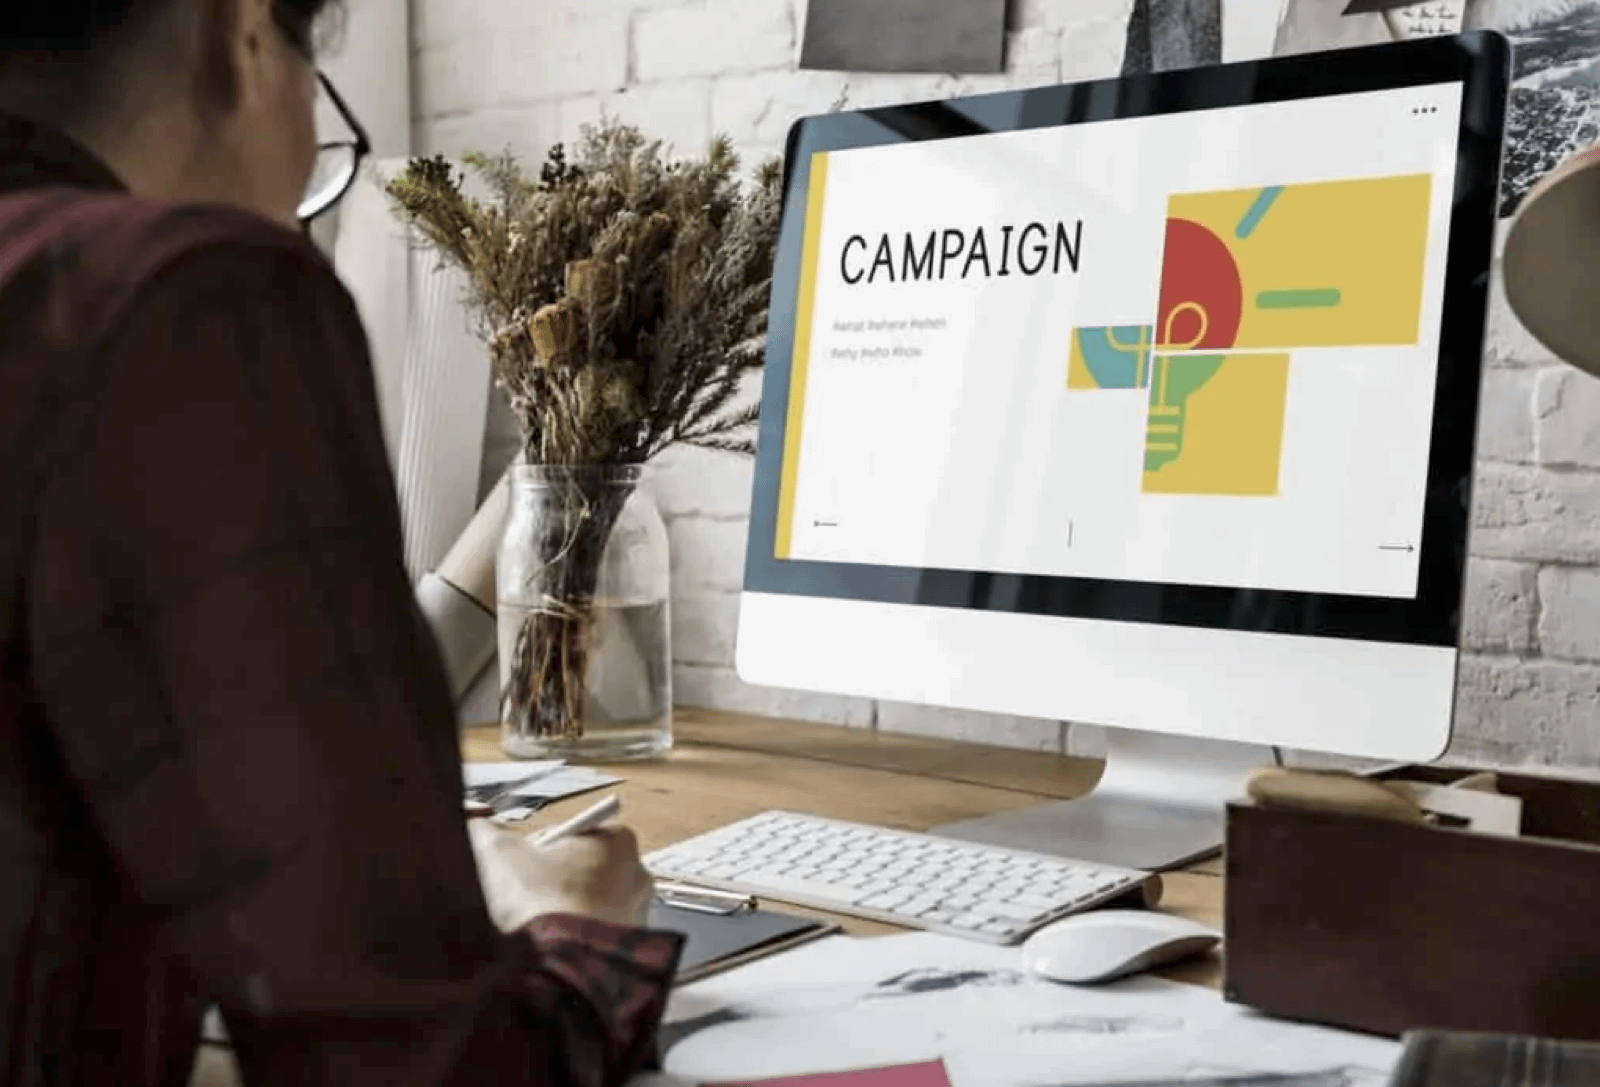 On-line Campaign Training: Call for Participants  for Training on How to Implement Successful  On-line Campaign in Montenegro (Deadline: Sunday CoB, 24 October 2021)